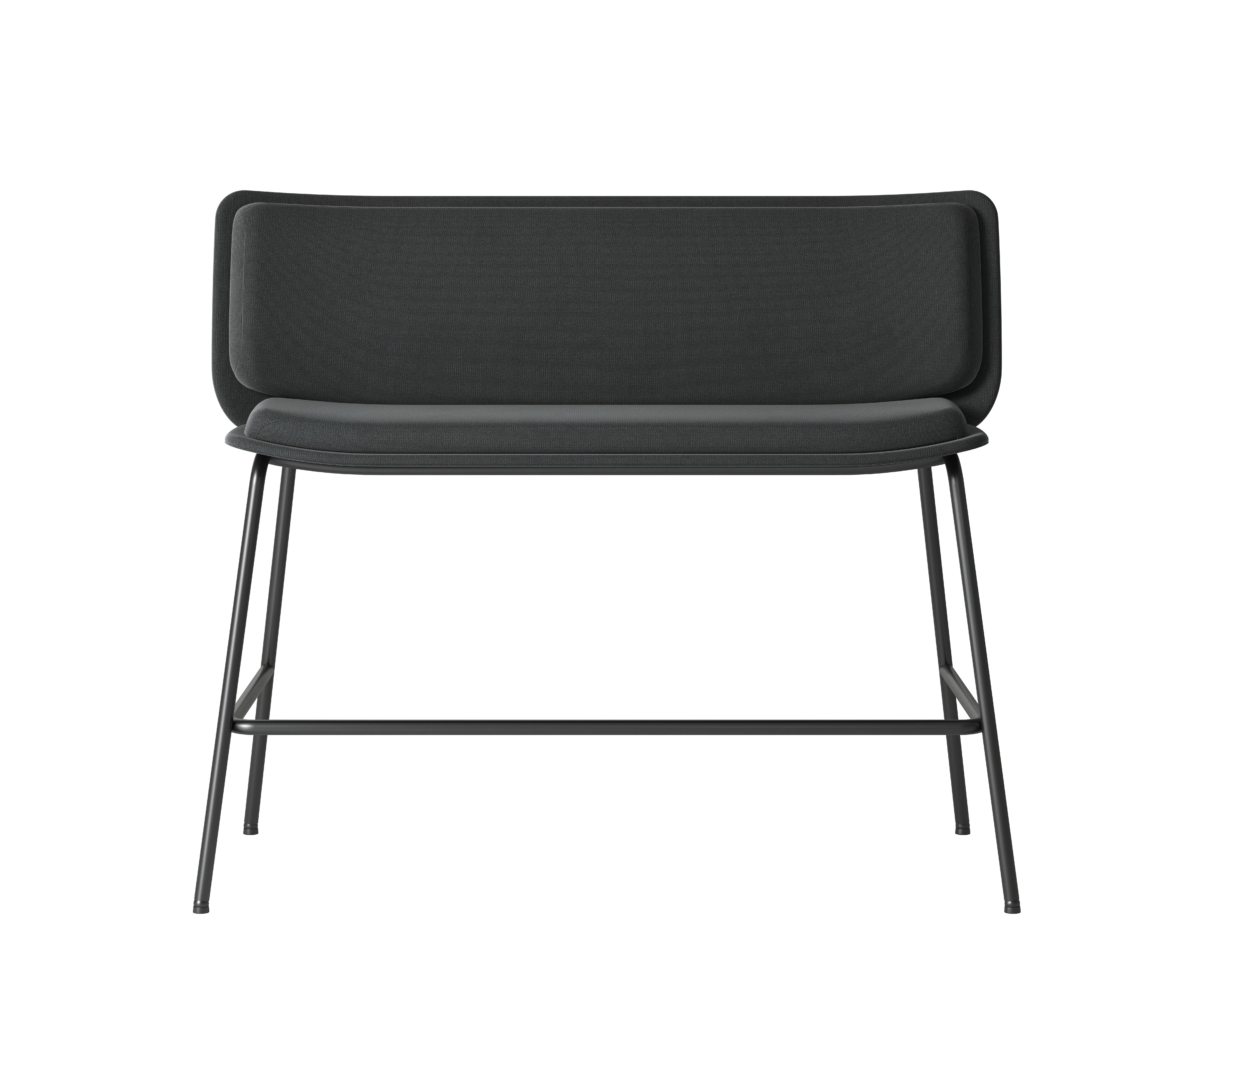 OCEE&FOUR – Stools & Benches – FourAll Bench Fully Upholstered – Packshot Image 4